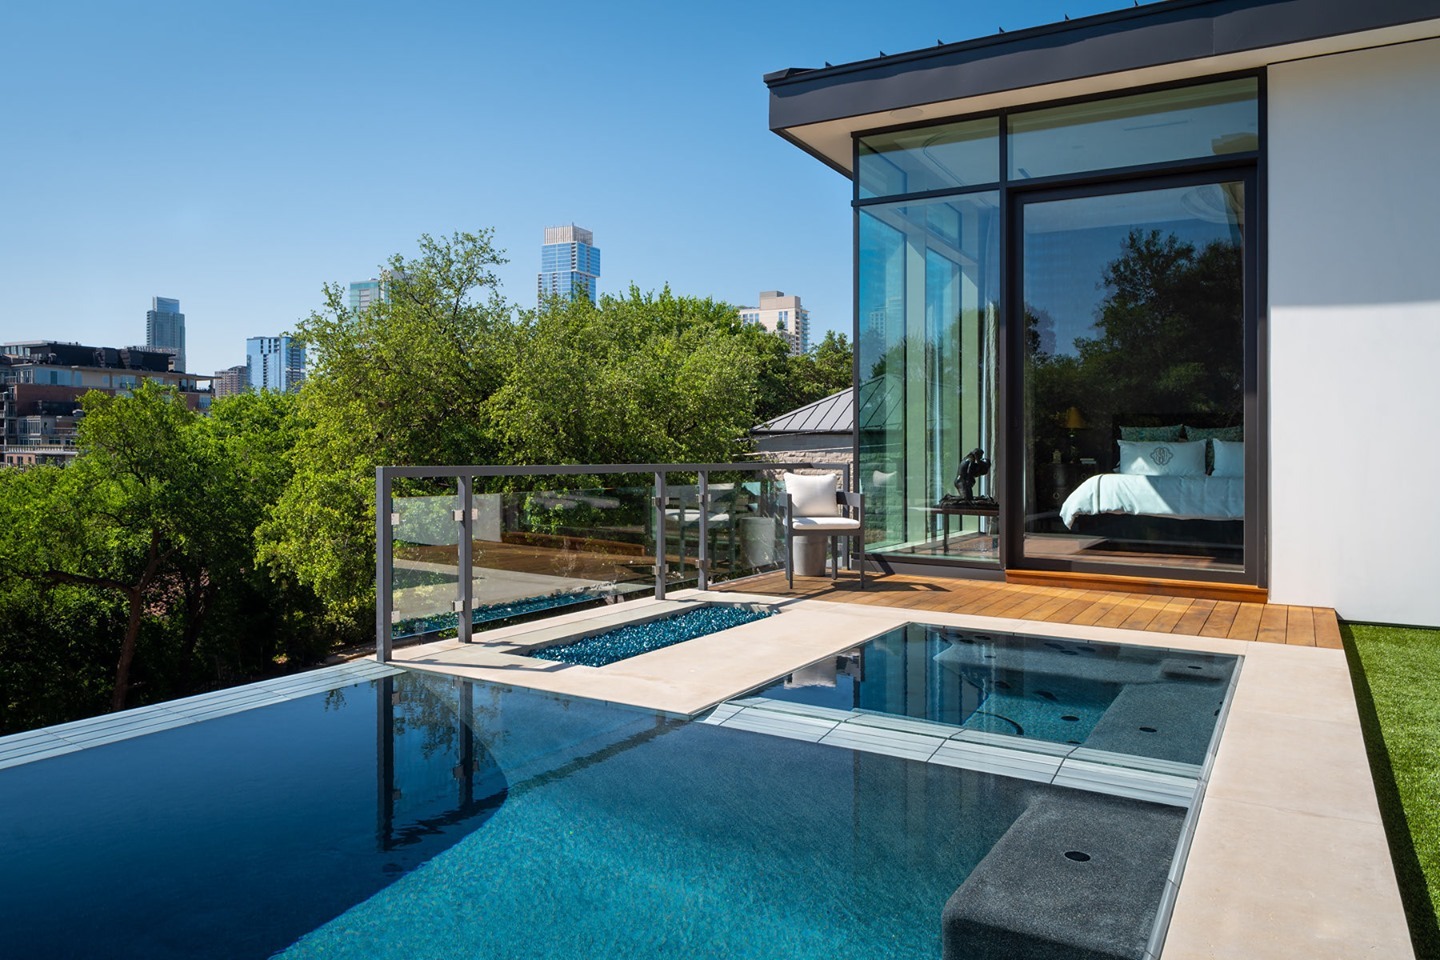 Our clients could be sheltered in place pretty much anywhere they wanted. Their first choice was to be in their new home overlooking Austin’s downtown skyline. ⁠
⁠
Built by @foursquarebuilders Designed by @laruearchitects Pool by @austinwaterdesigns Interiors by @lovecounty